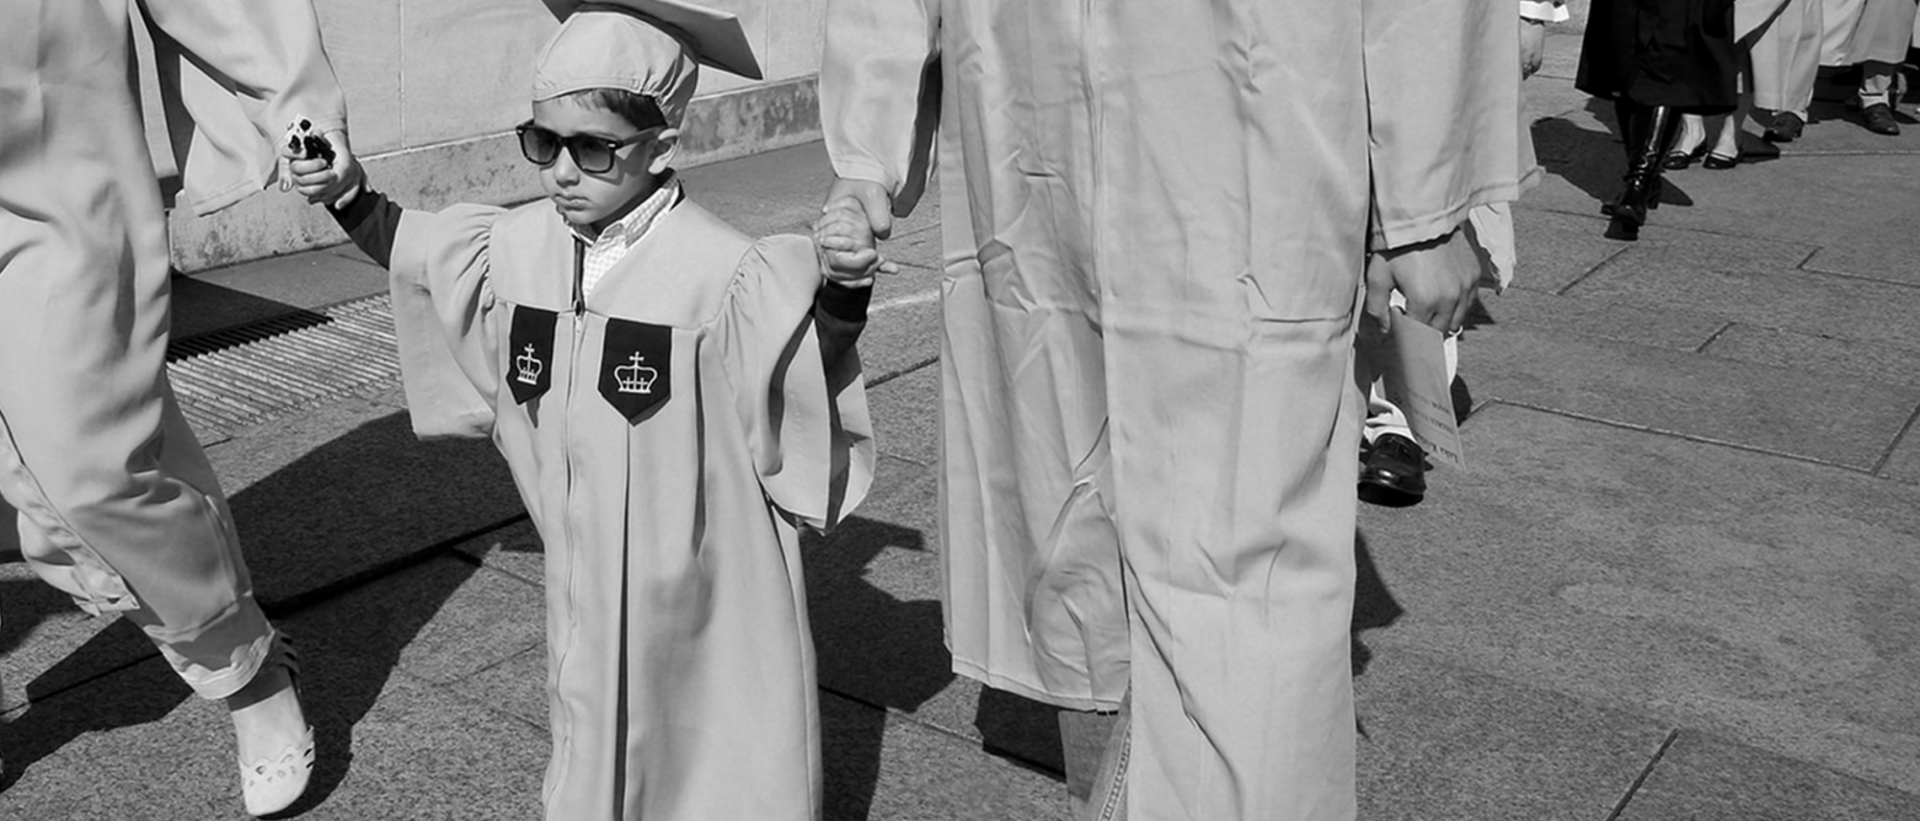 Child in graduation gown.